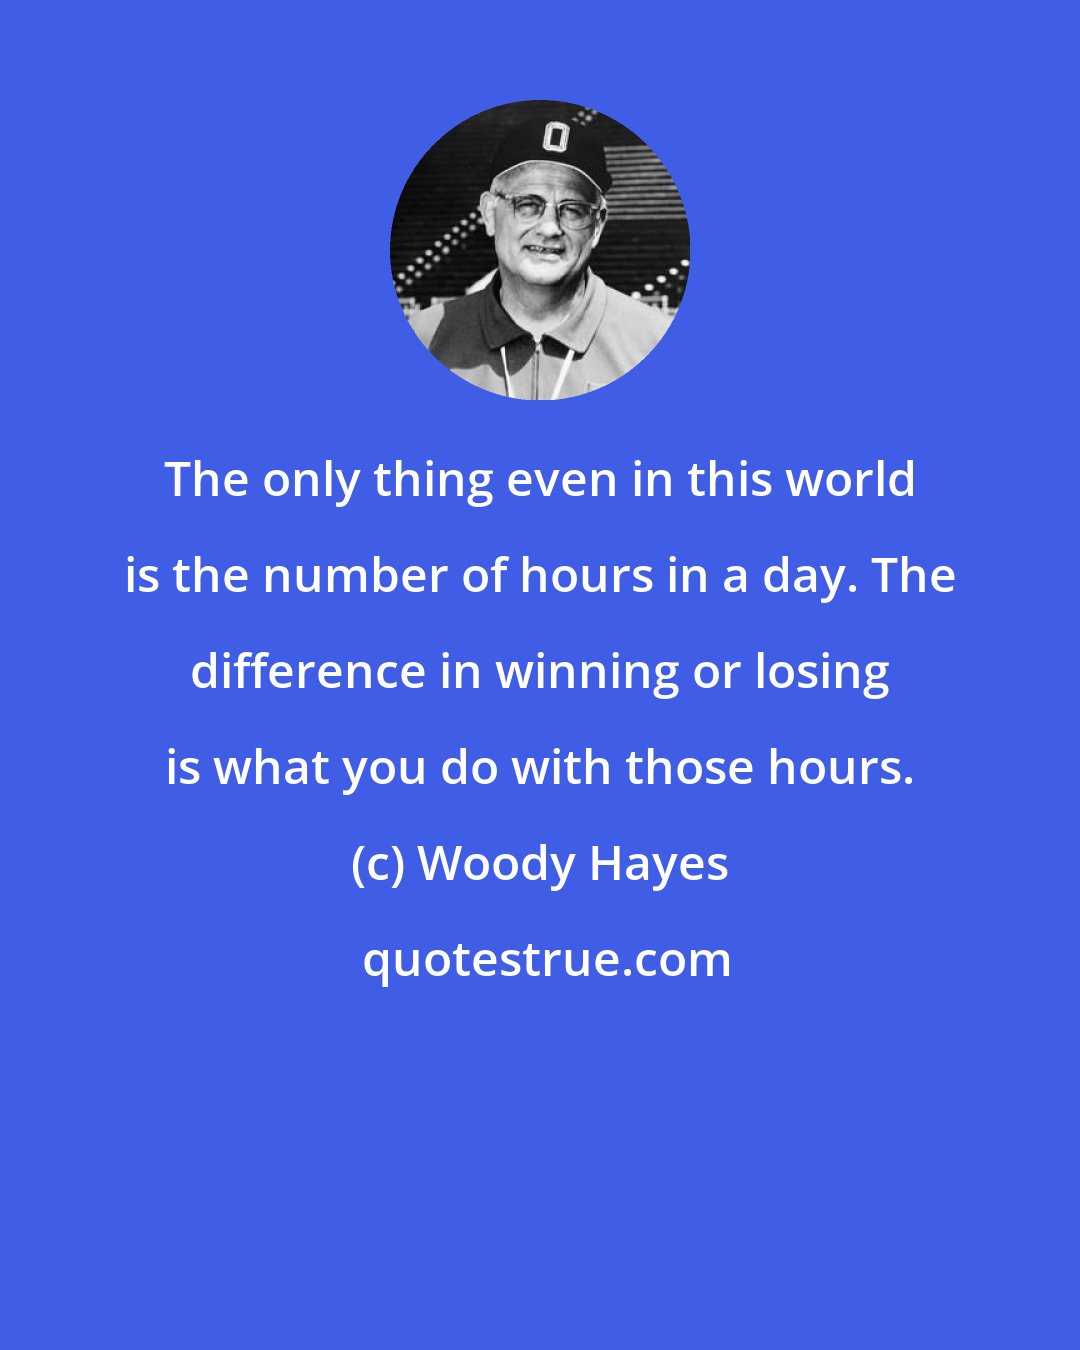 Woody Hayes: The only thing even in this world is the number of hours in a day. The difference in winning or losing is what you do with those hours.